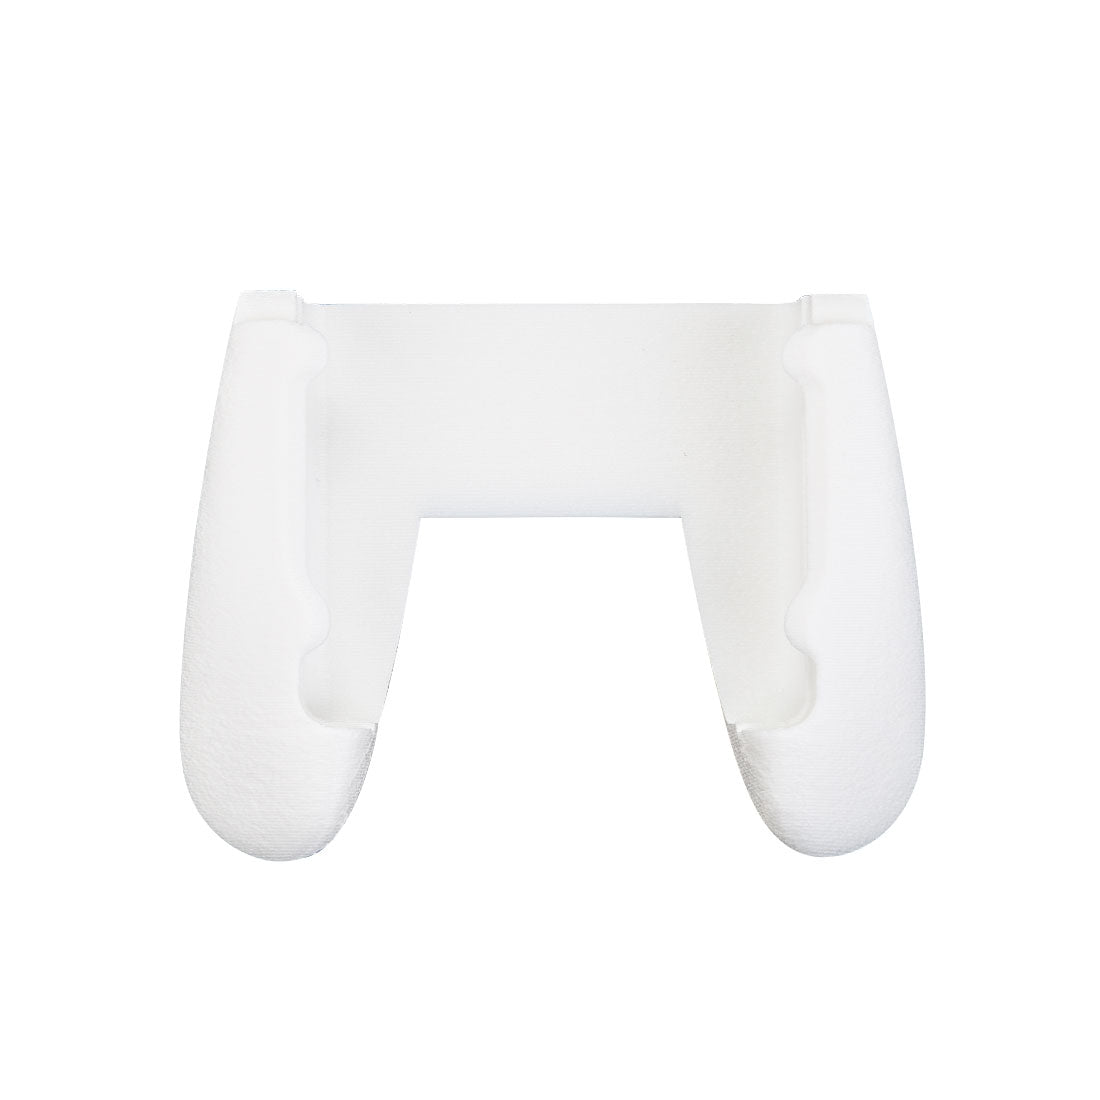 litnxt_3D_printed_flexible_handle_for_analogue_pocket_game_consoles_01